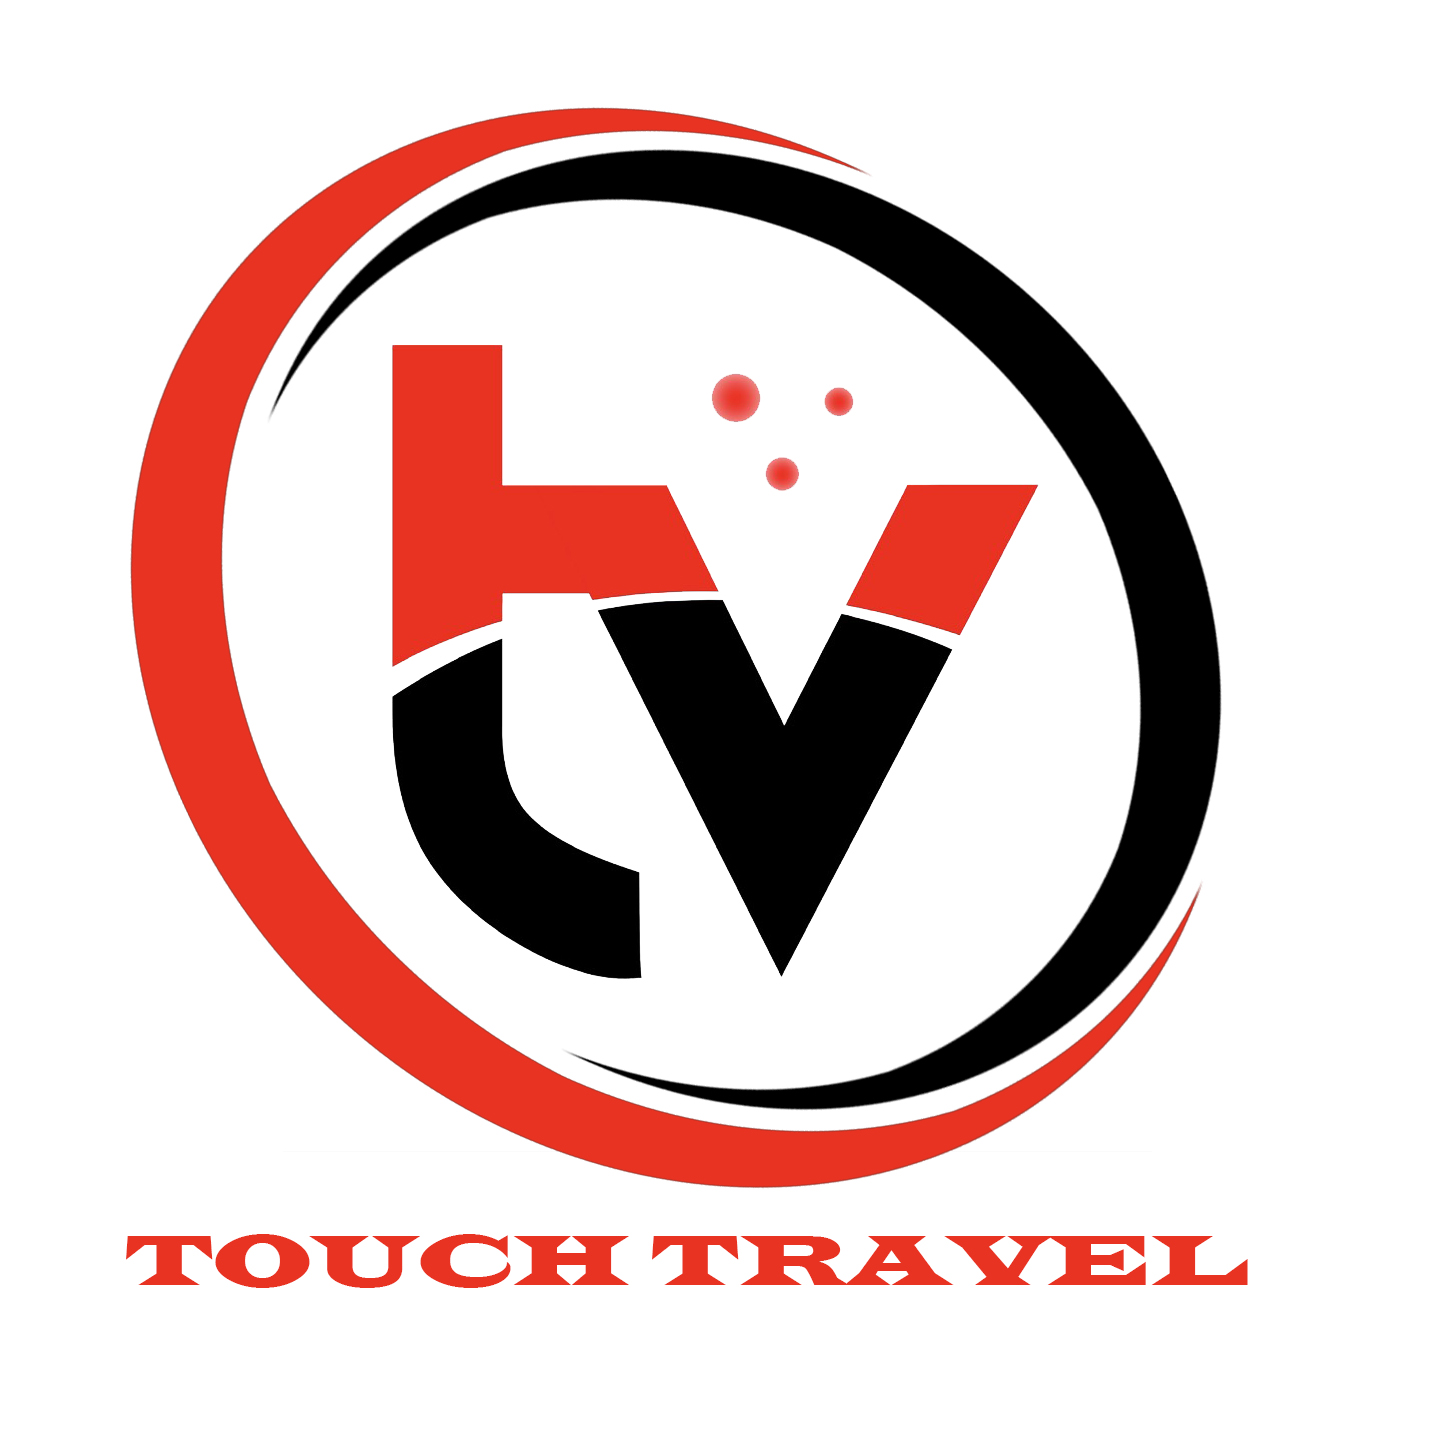 TOUCH TRAVEL